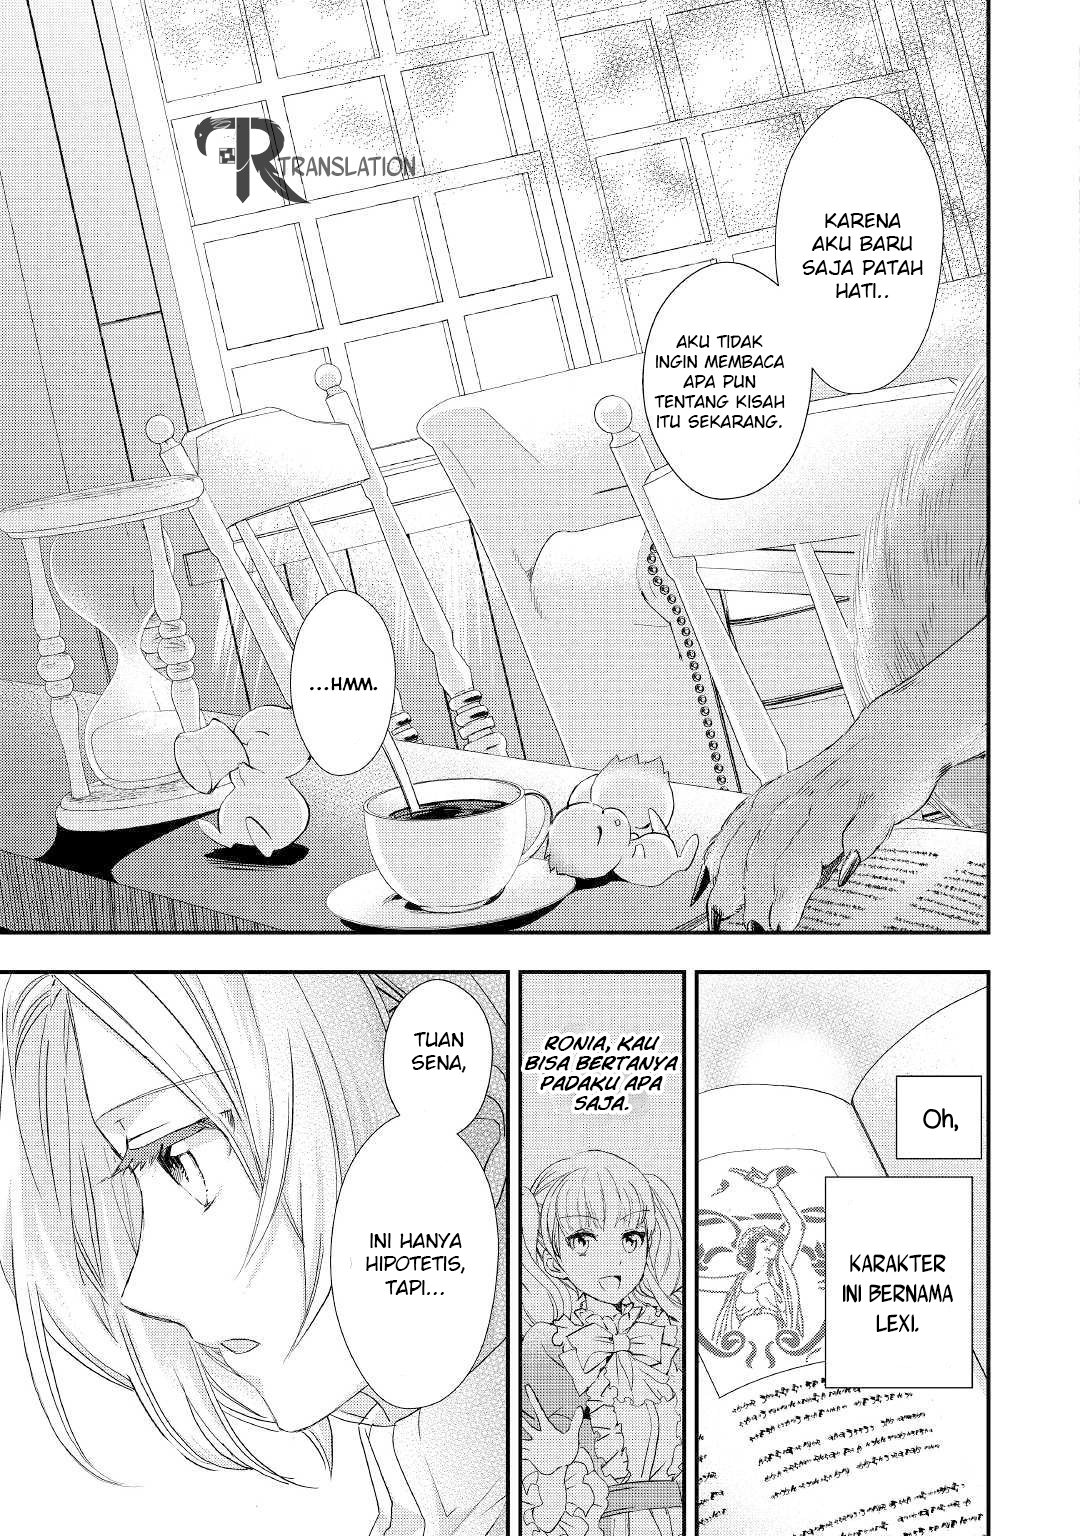 Milady Just Wants to Relax Chapter 010.2